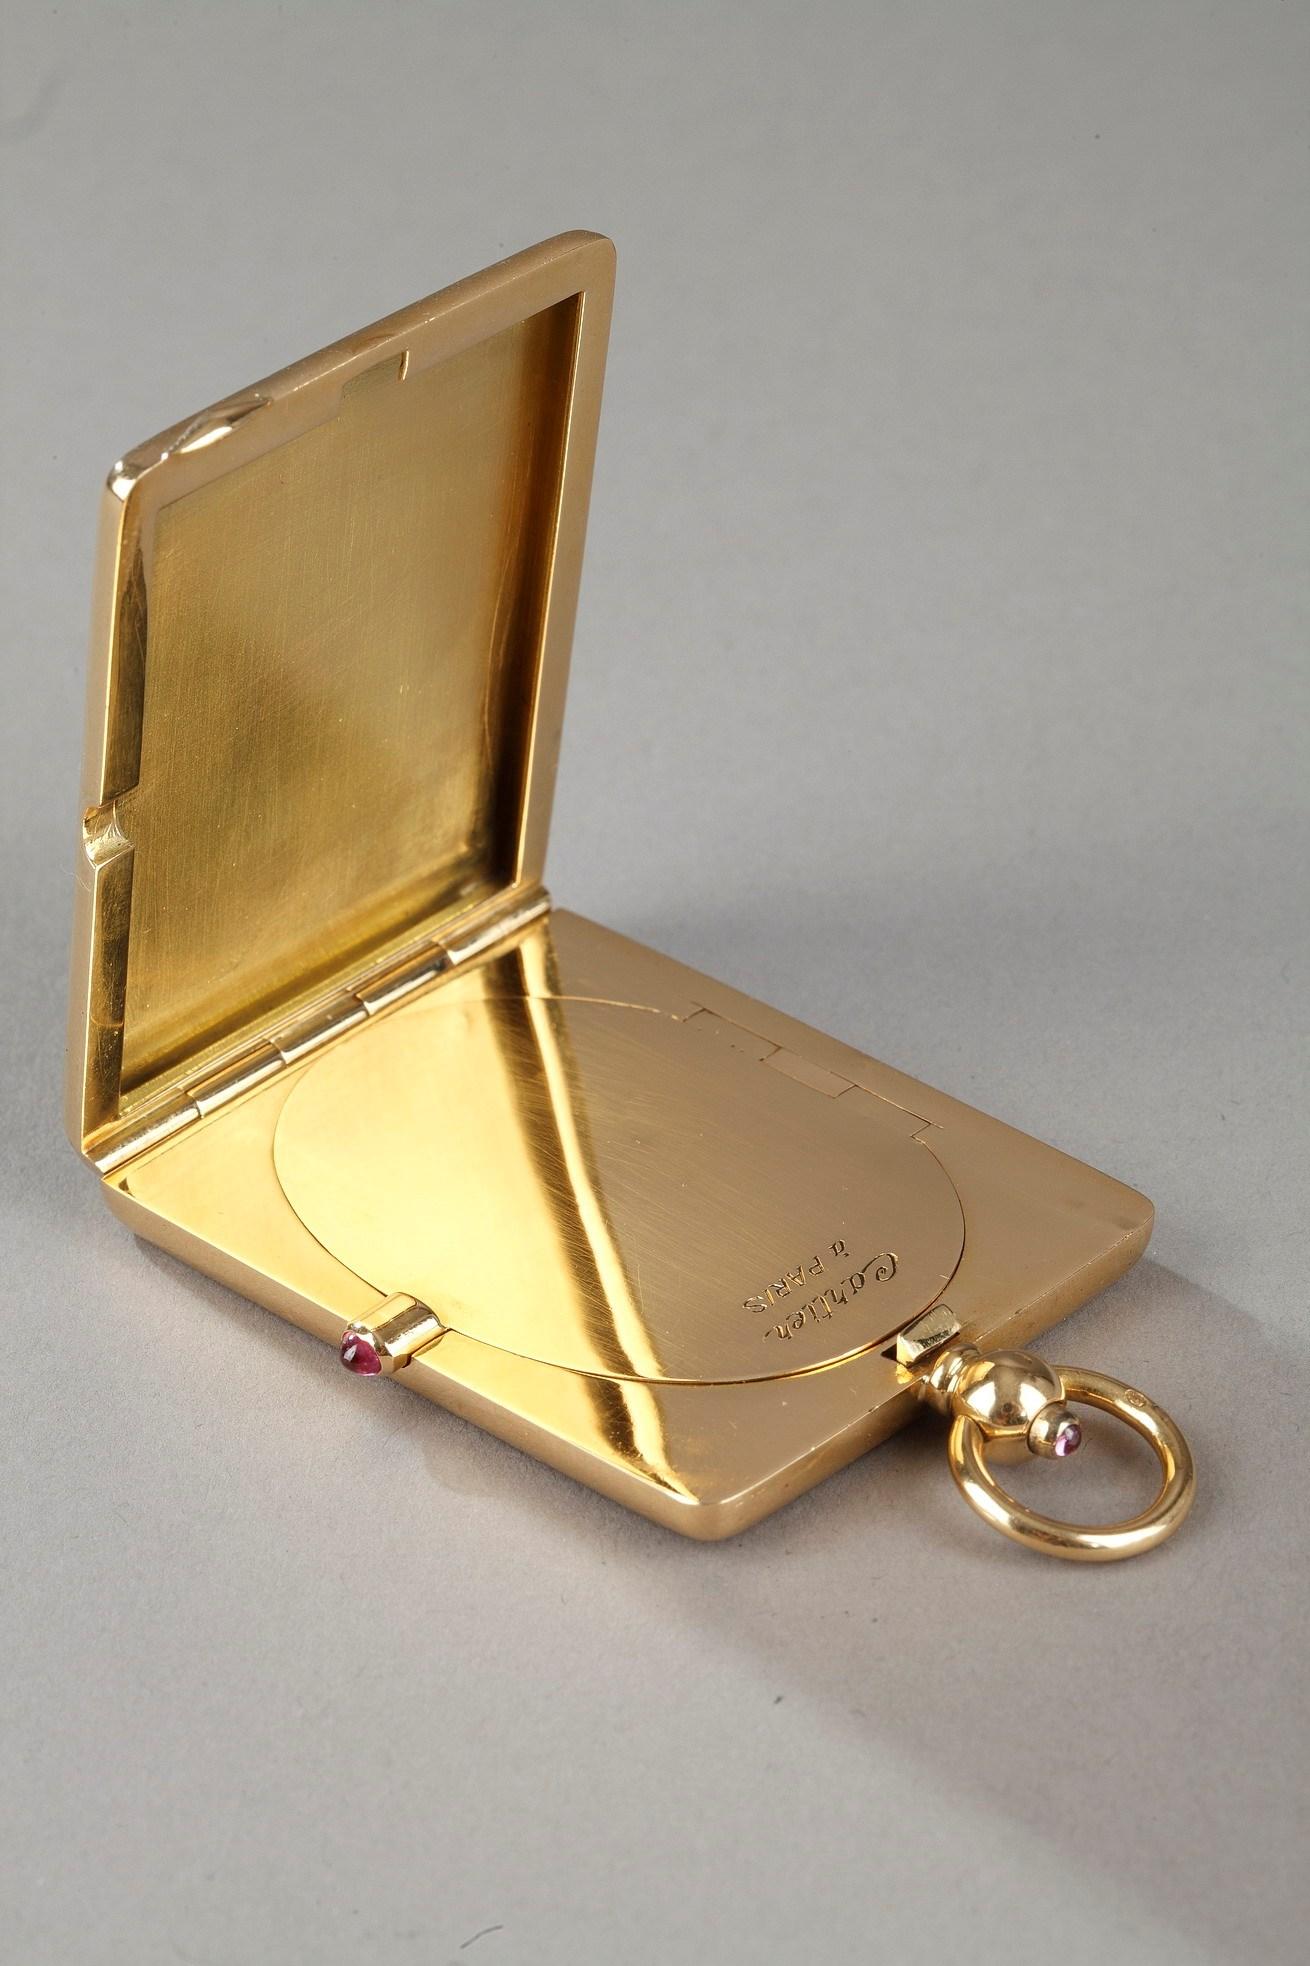 Rectangular gold case or box signed Cartier in Paris. The case is finely guilloché with rhombic motifs and framed by a stylized foliated frieze. The case includes a bail. The push button set with a cabochon tourmaline opens the case. Inside a system